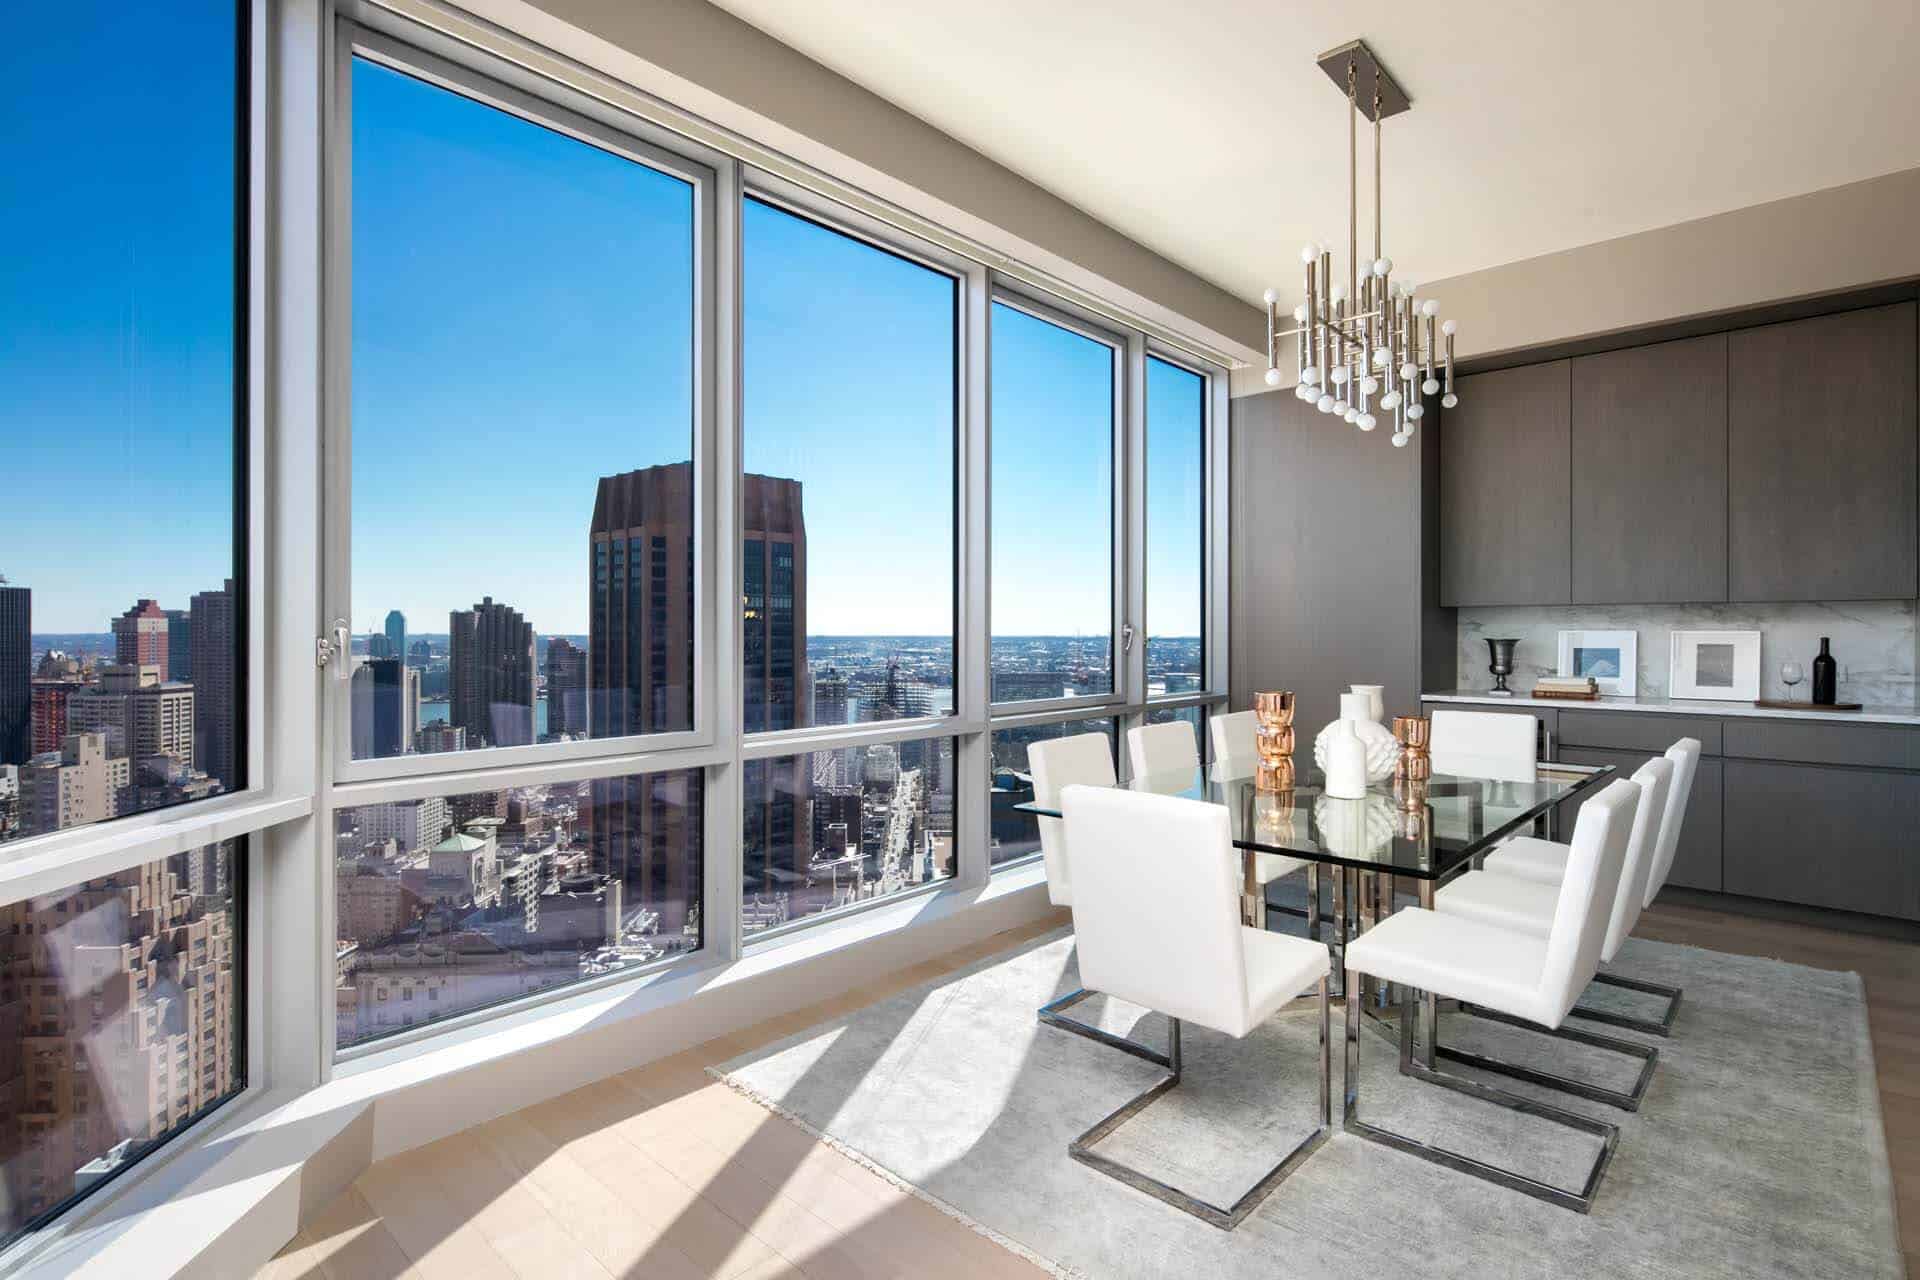 Luxury penthouse kitchen features flat front Bilotta cabinetry, dining area and floor-to-ceiling windows with NYC view.